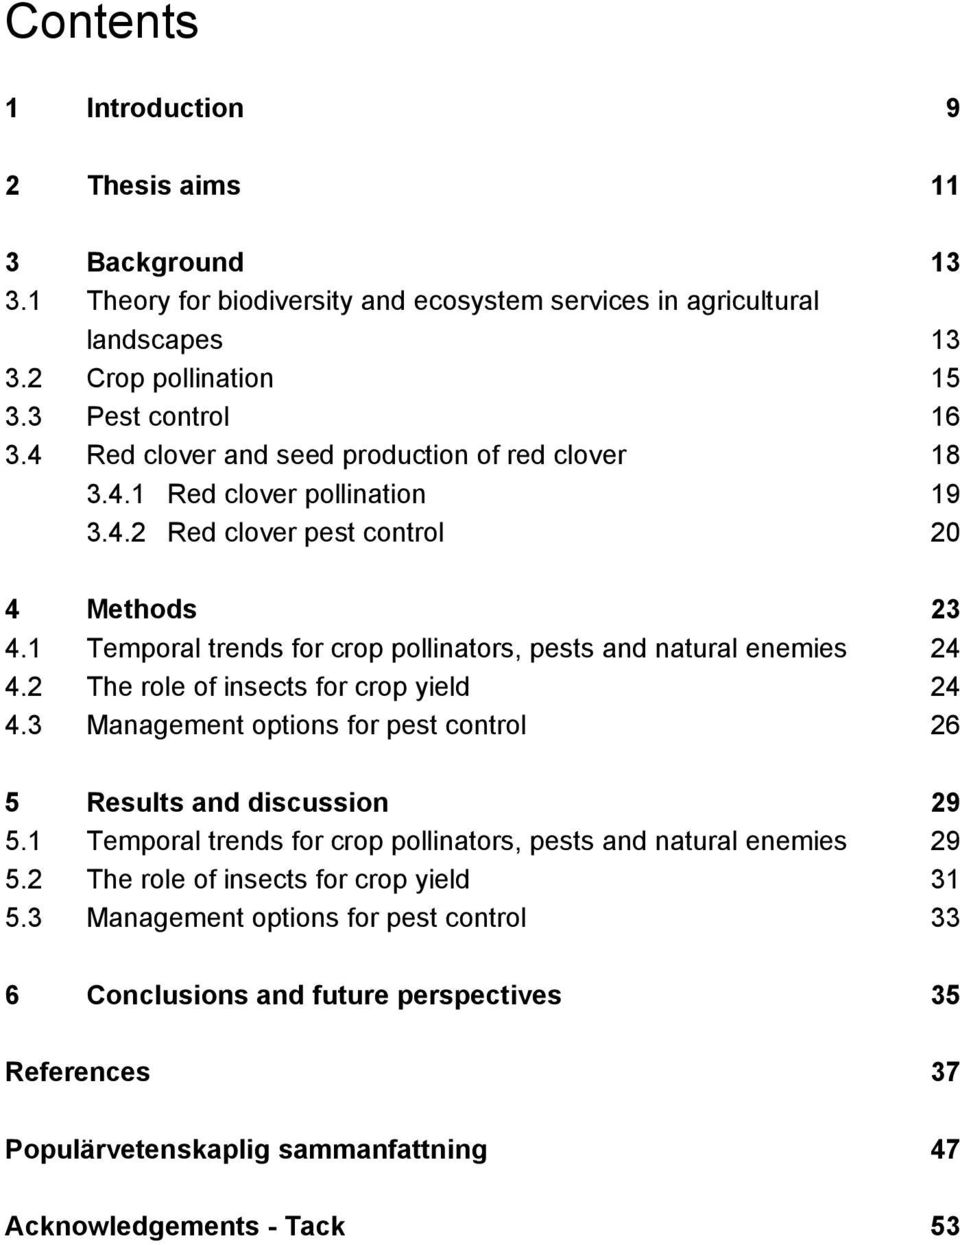 1 Temporal trends for crop pollinators, pests and natural enemies 24 4.2 The role of insects for crop yield 24 4.3 Management options for pest control 26 5 Results and discussion 29 5.